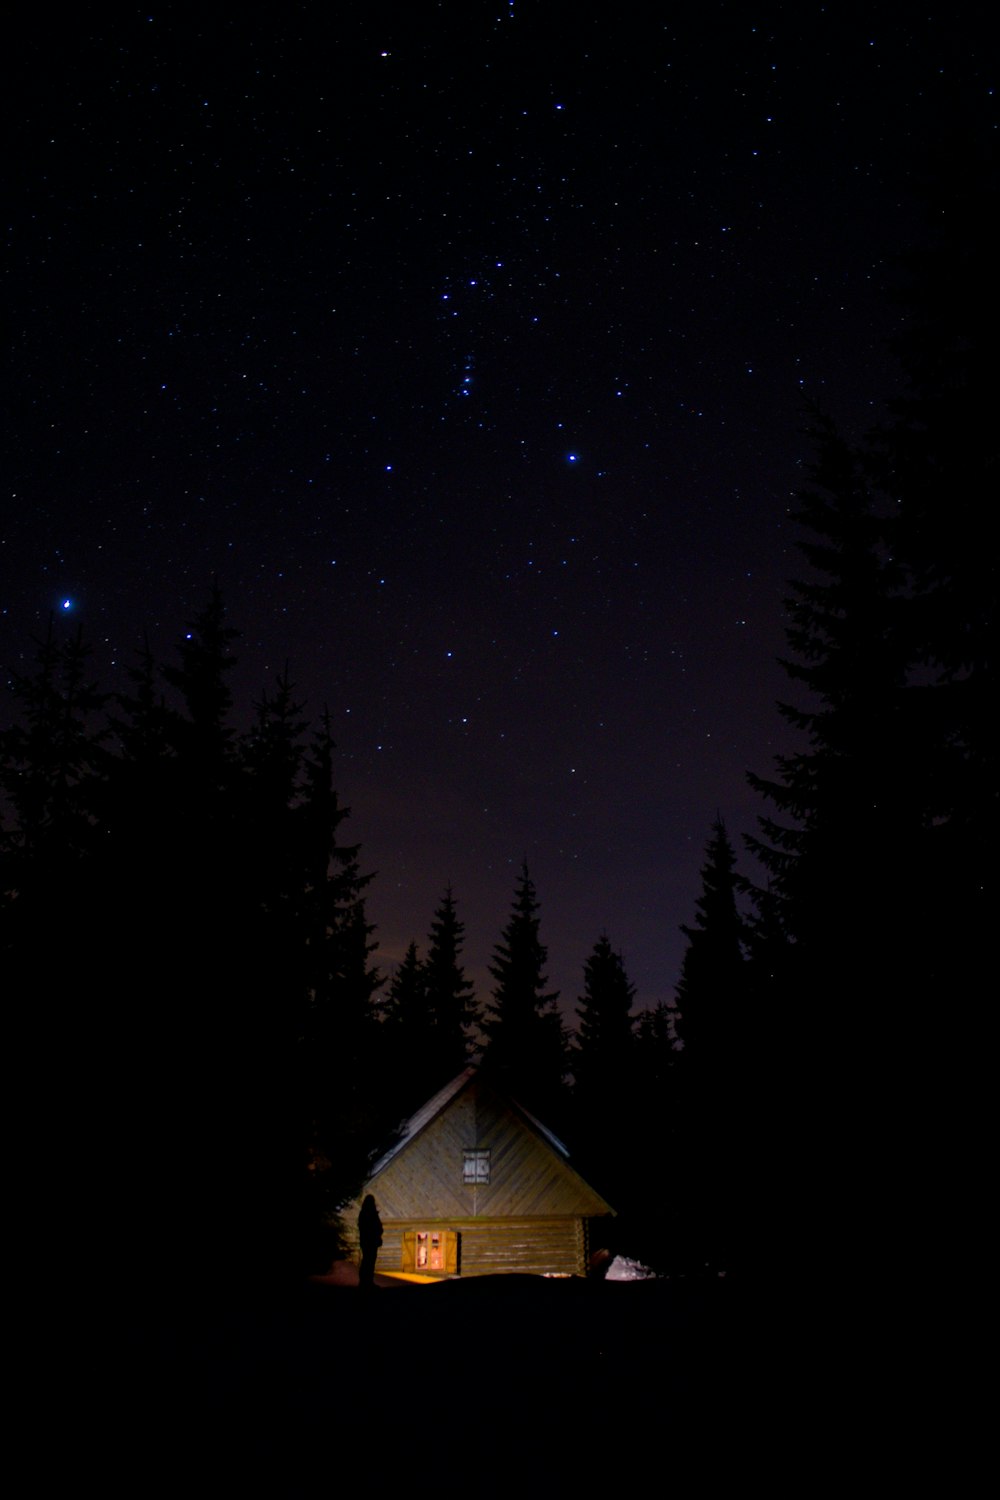 brown wooden house near trees during night time